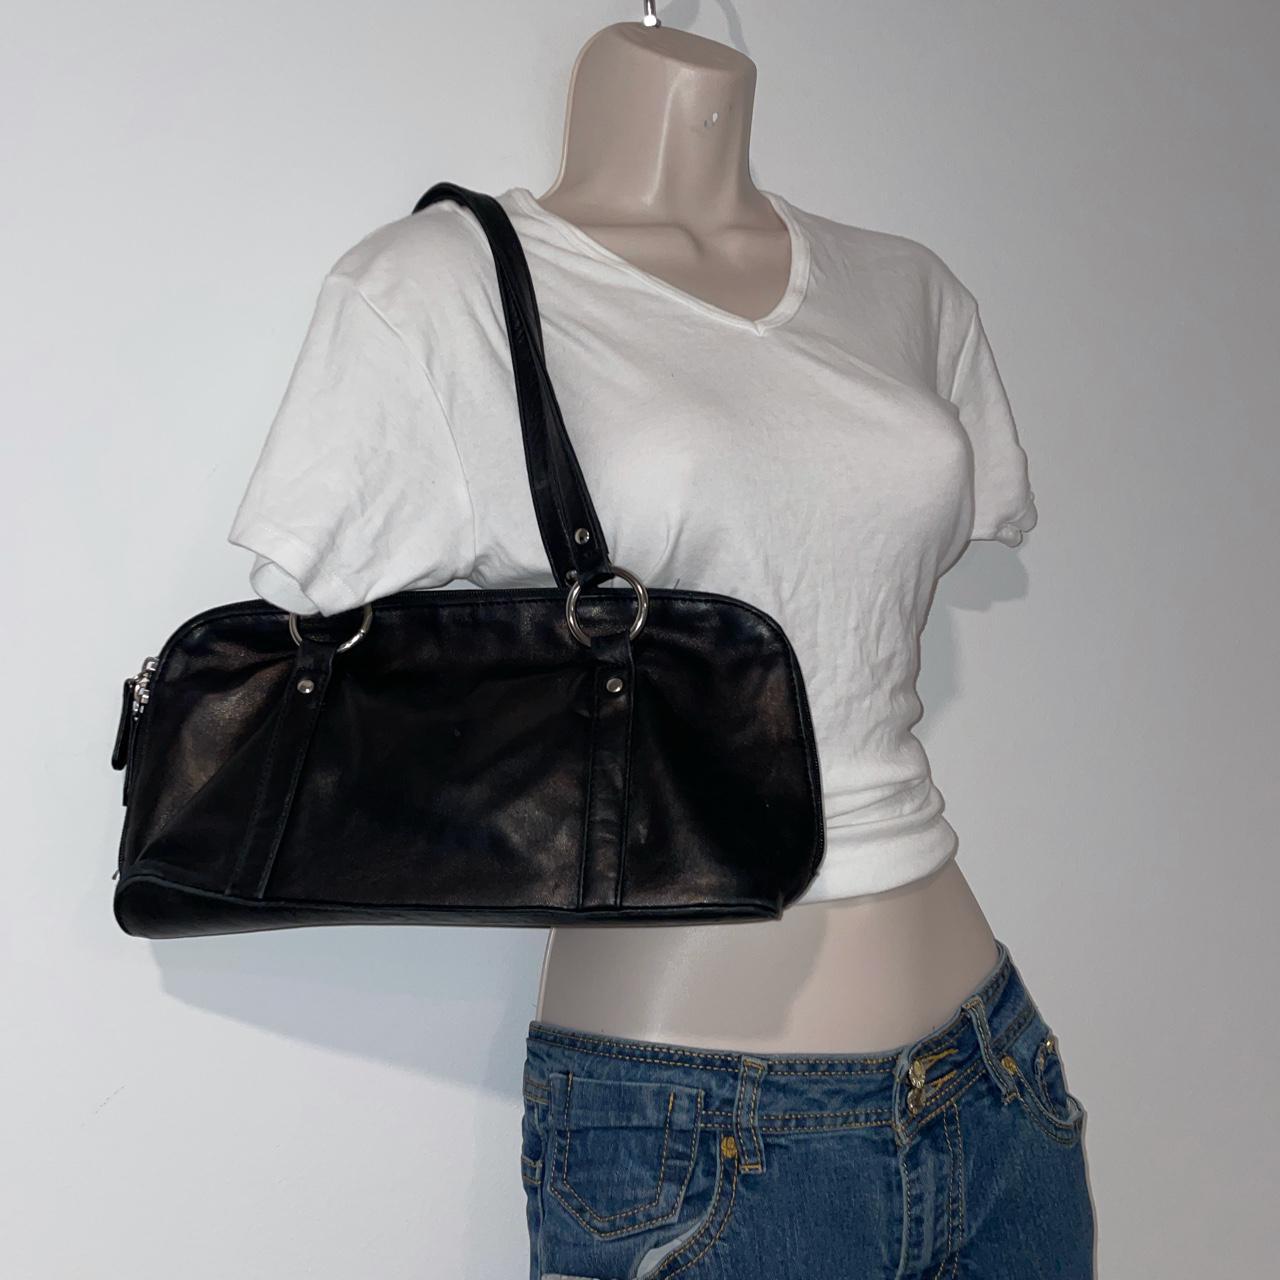 Product Image 2 - Amazing black purse with a